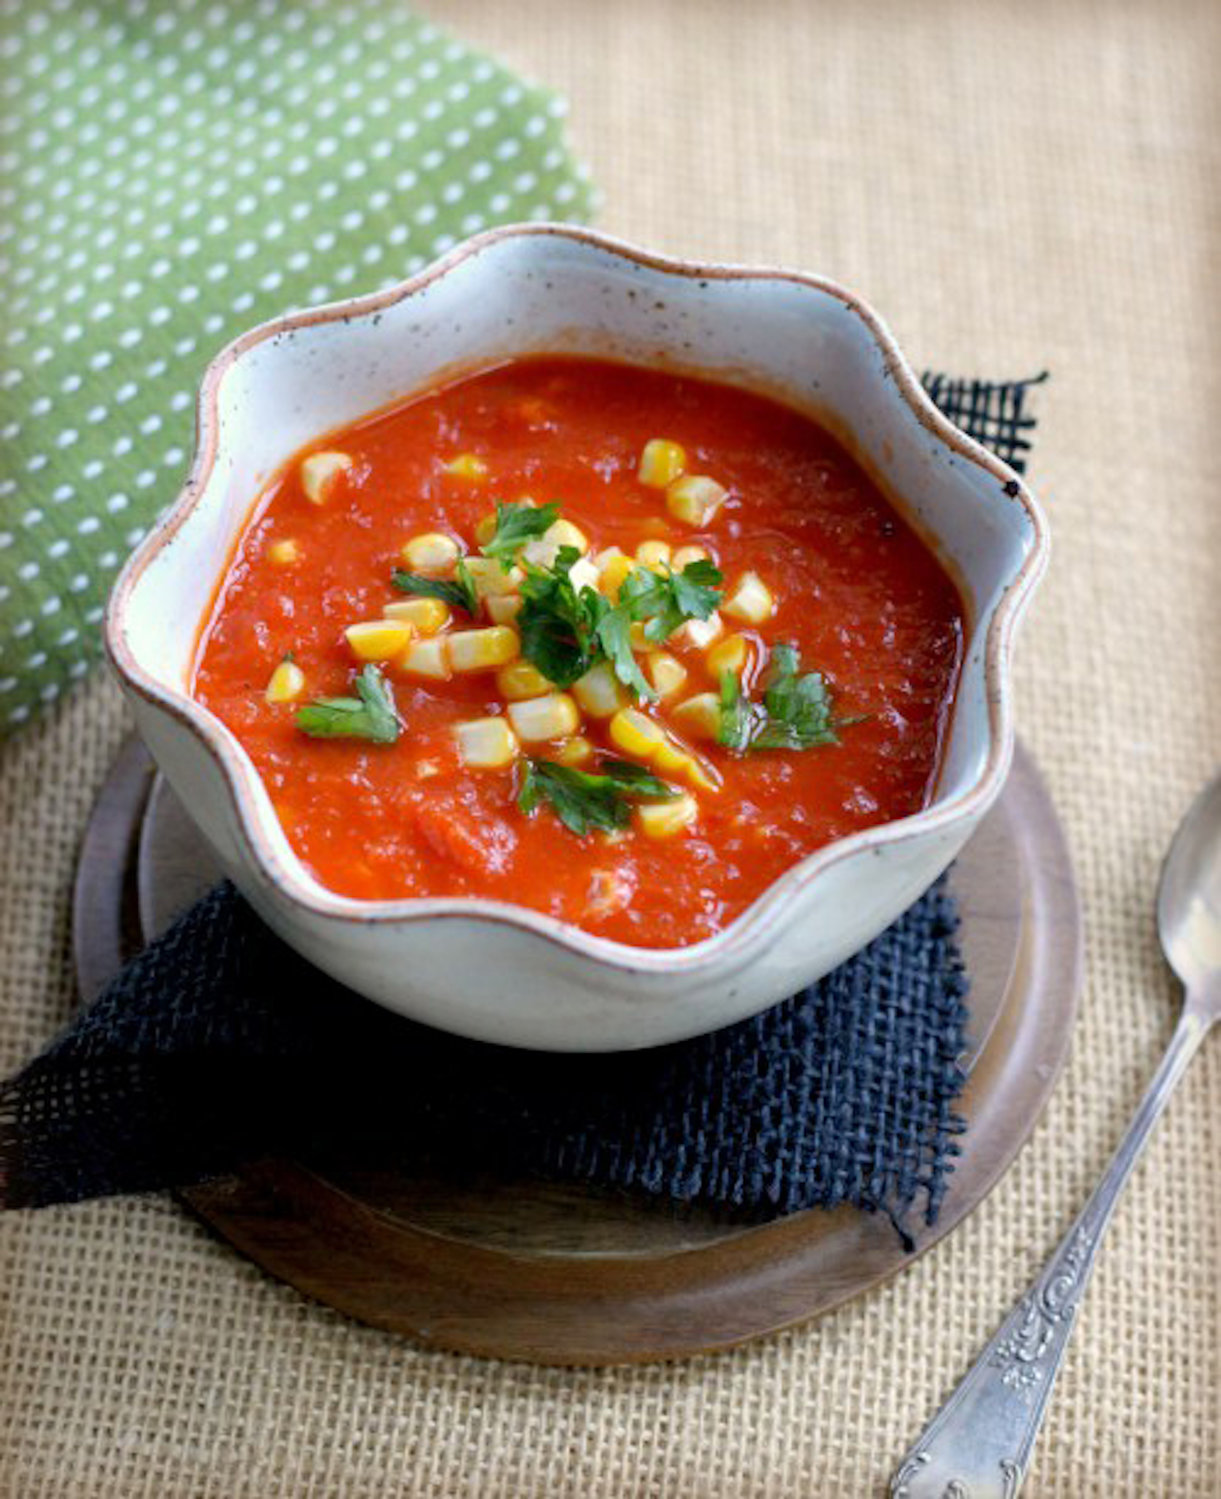 Roasted summer vegetables create a sweet and flavorful base for this soup.